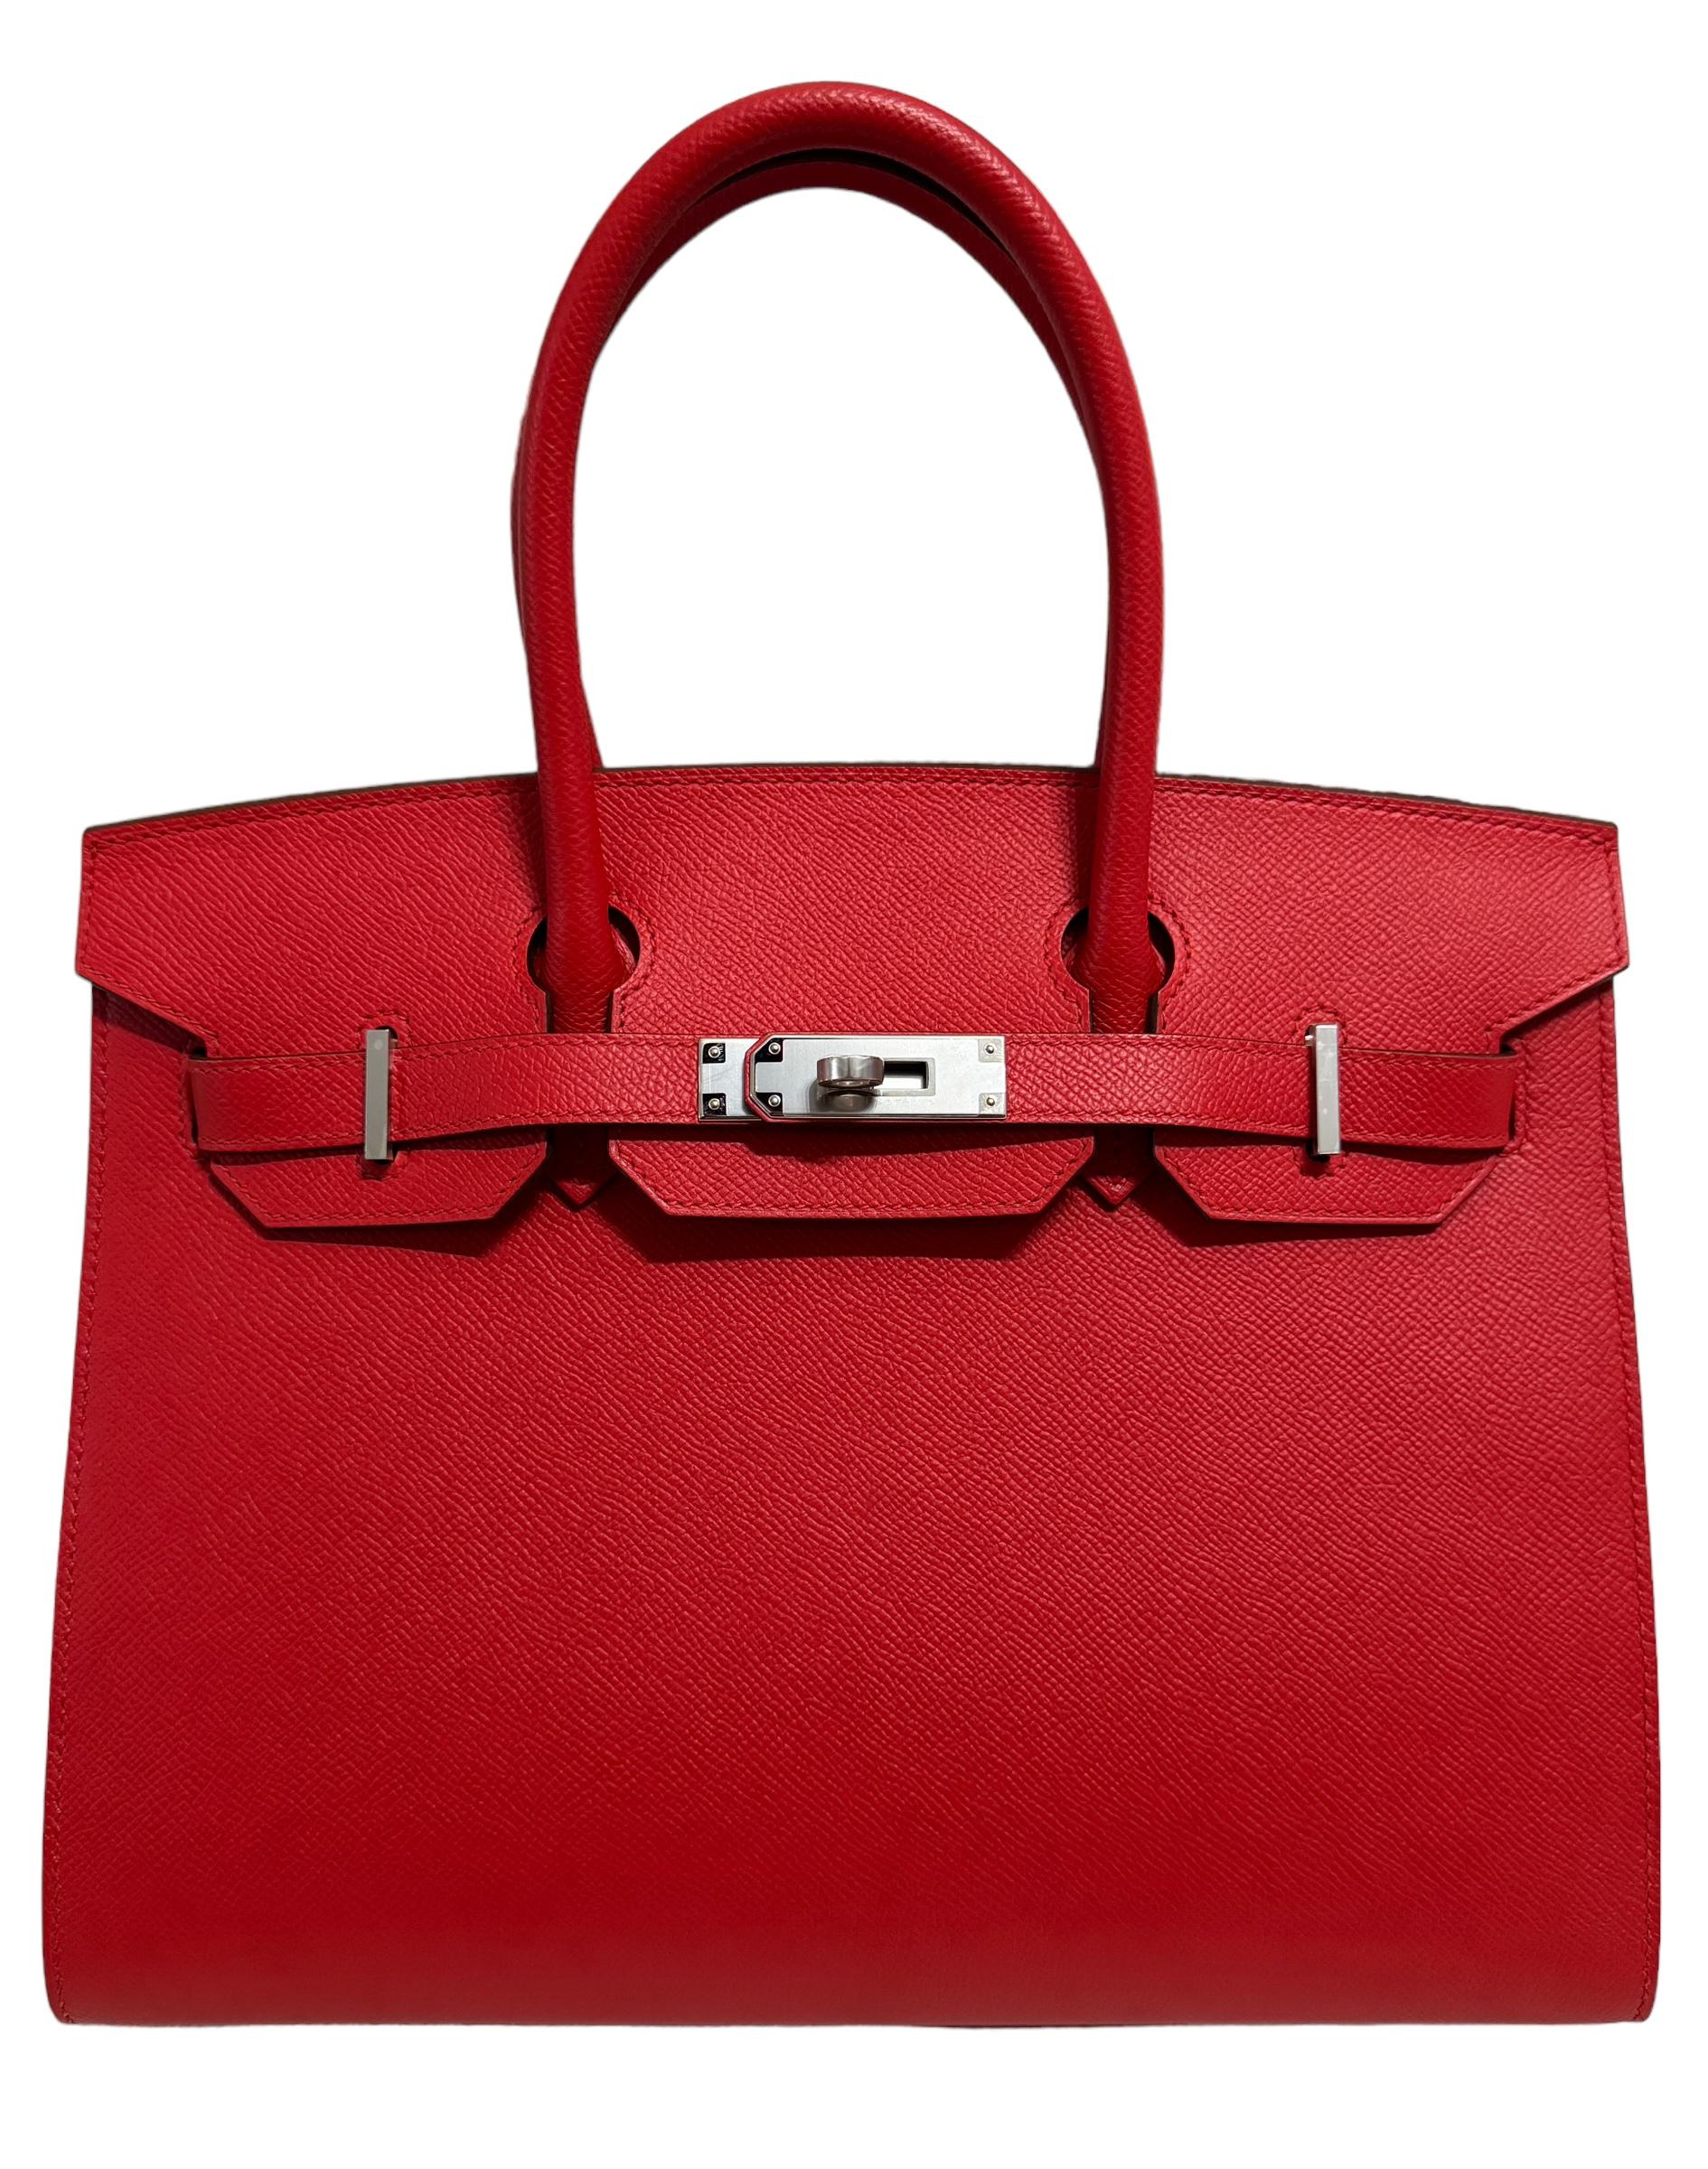 Absolutely Stunning Rare, Limited Edition Hermes Birkin 30 Sellier Rouge de Coeur. Complimented by Epsom Leather and Palladium Hardware. As New Condition Plastic on all Hardware. Z Stamp 2021. 

Please see last photo. Bag has minor marks on bottom